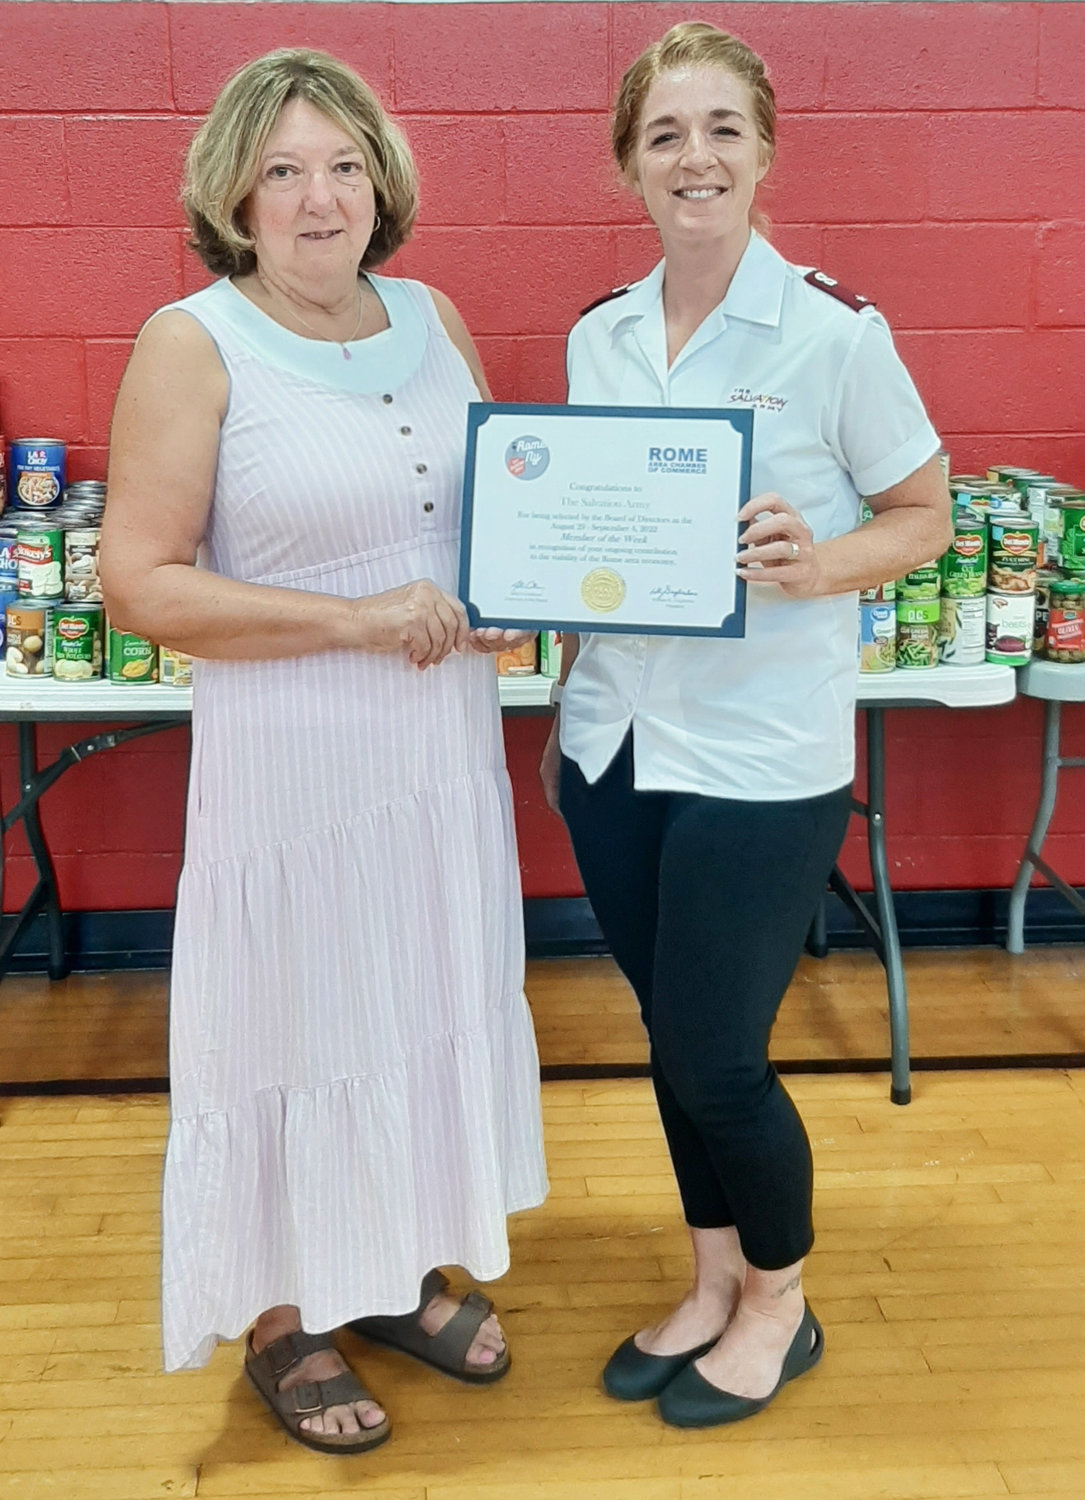 Suzanne Carvelli, president of the Rome College Foundation and representative of the Rome Chamber of Commerce Membership Committee, left, presents Lt. Tabitha Swires, co-commanding officer at the Salvation Army’s Rome Citadel, with a congratulatory certificate honoring the Salvation Army as the Rome Area Chamber of Commerce Member of the Week.